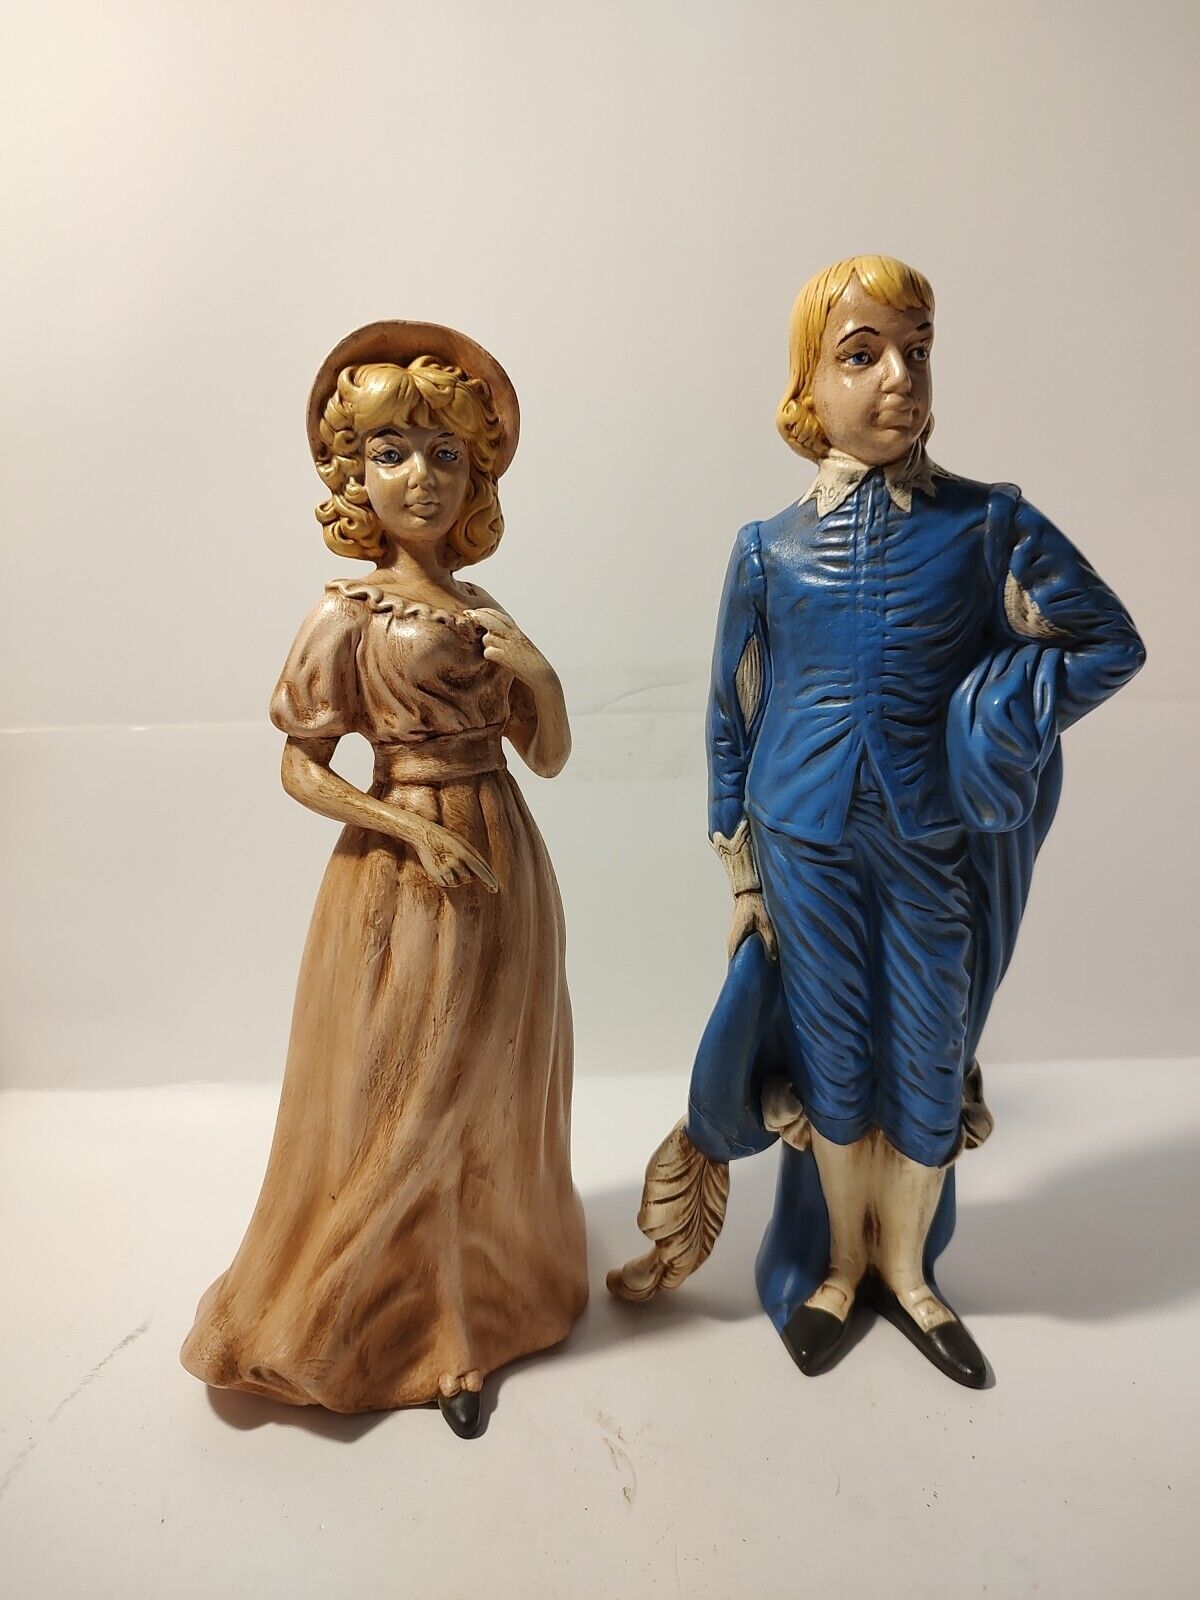 Vintage Ceramic Blue Boy And Pink Lady Circa 1970s Handpainted Figurines Kitschy